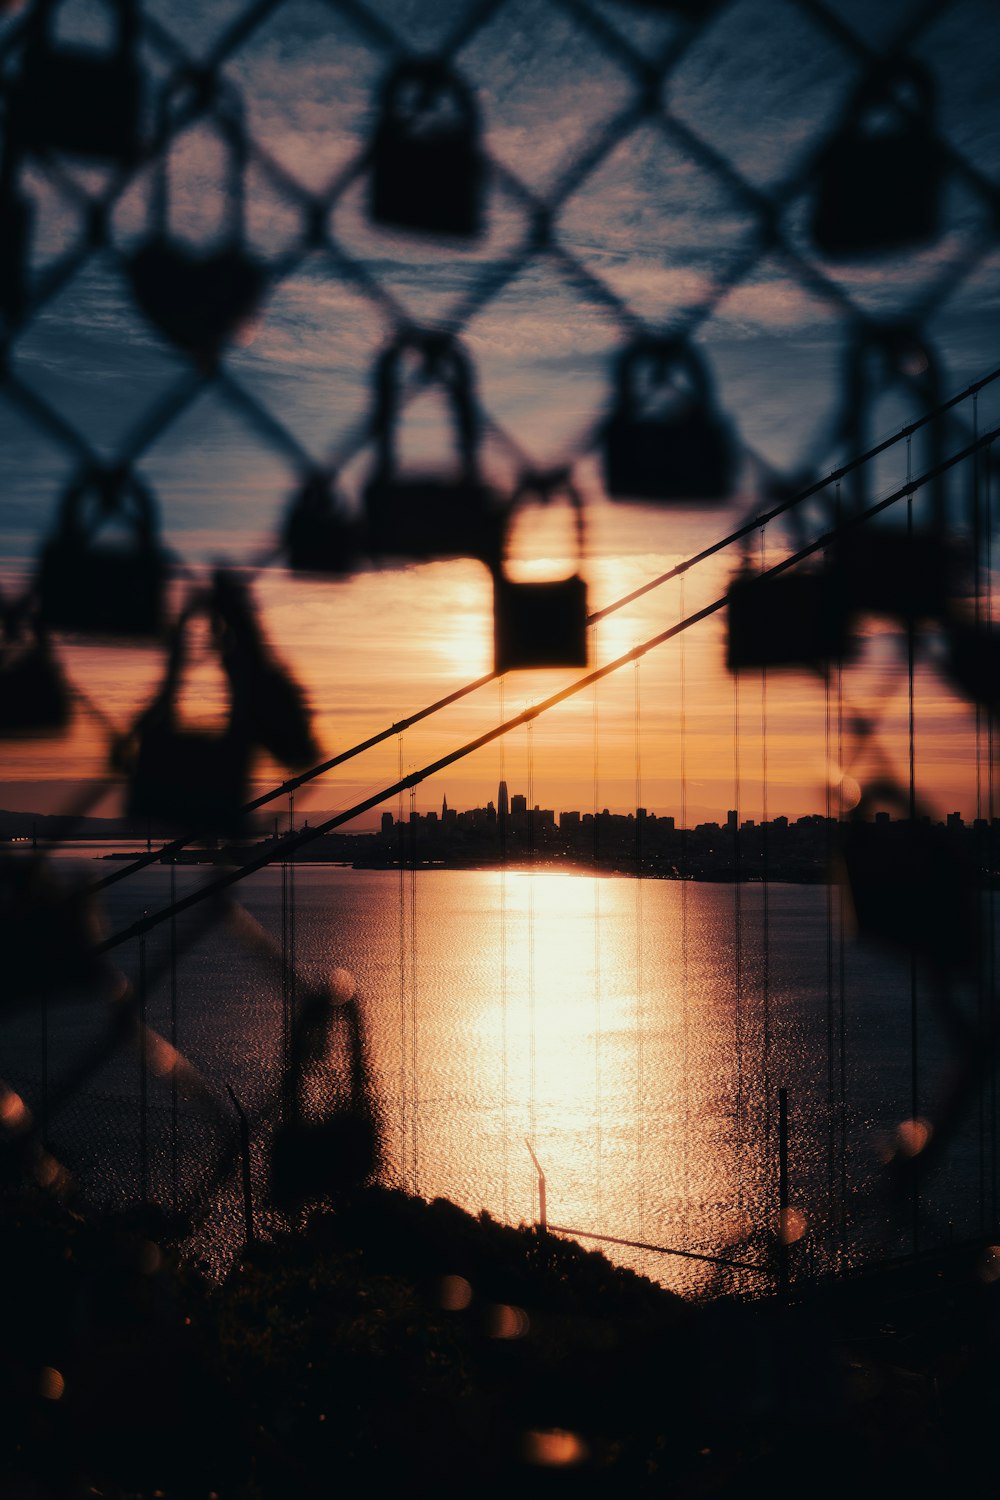 a view of a body of water through a chain link fence